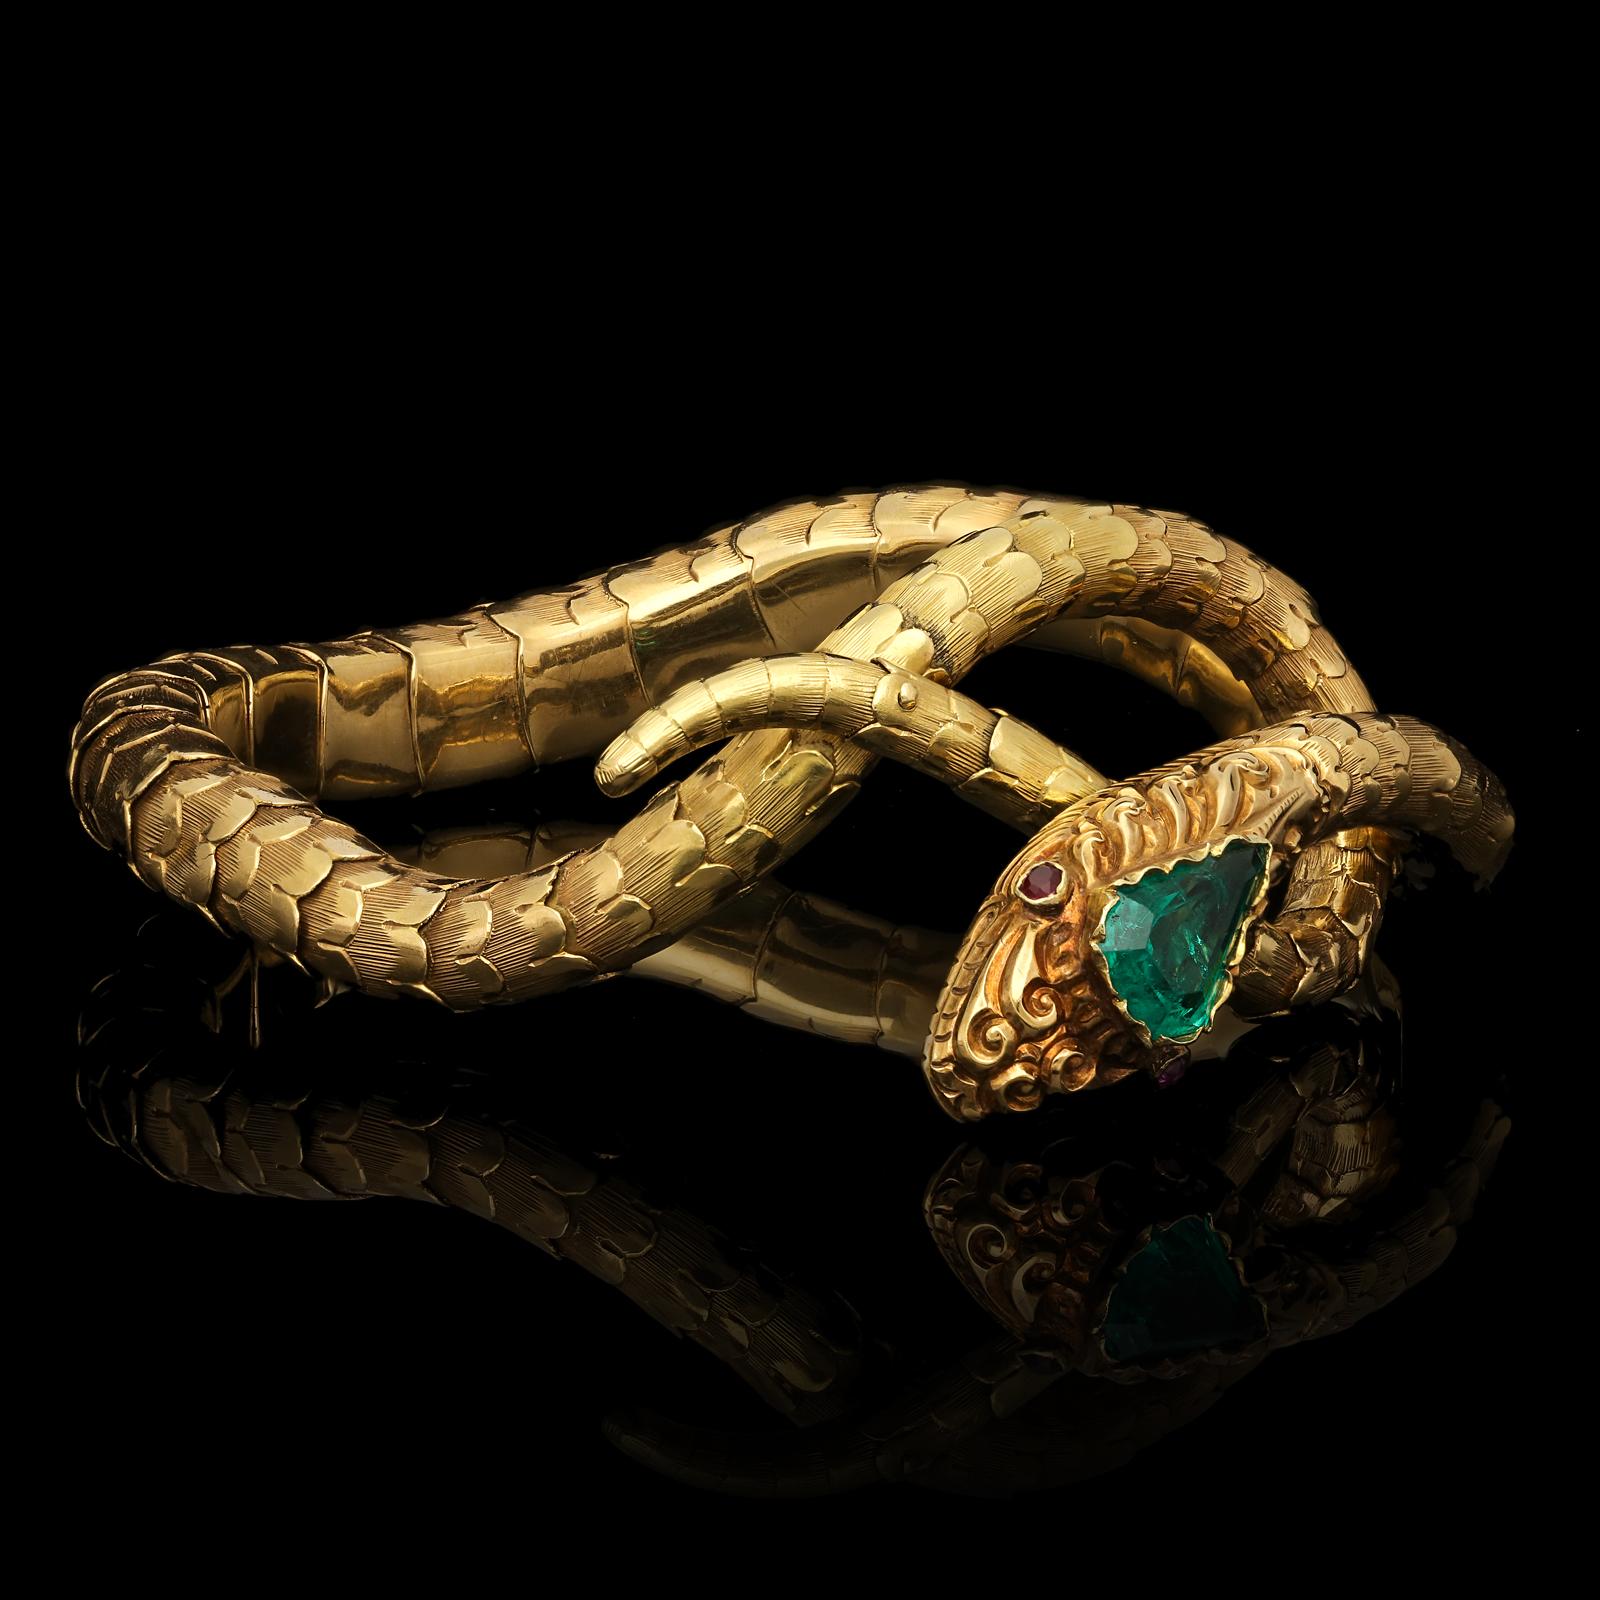 A beautiful Victorian gold and emerald snake bracelet c.1890, the long sinuous body formed of multiple highly articulated overlapping sections of finely engraved scales in 18ct gold, the head set with a wonderful intense green kite-shaped emerald